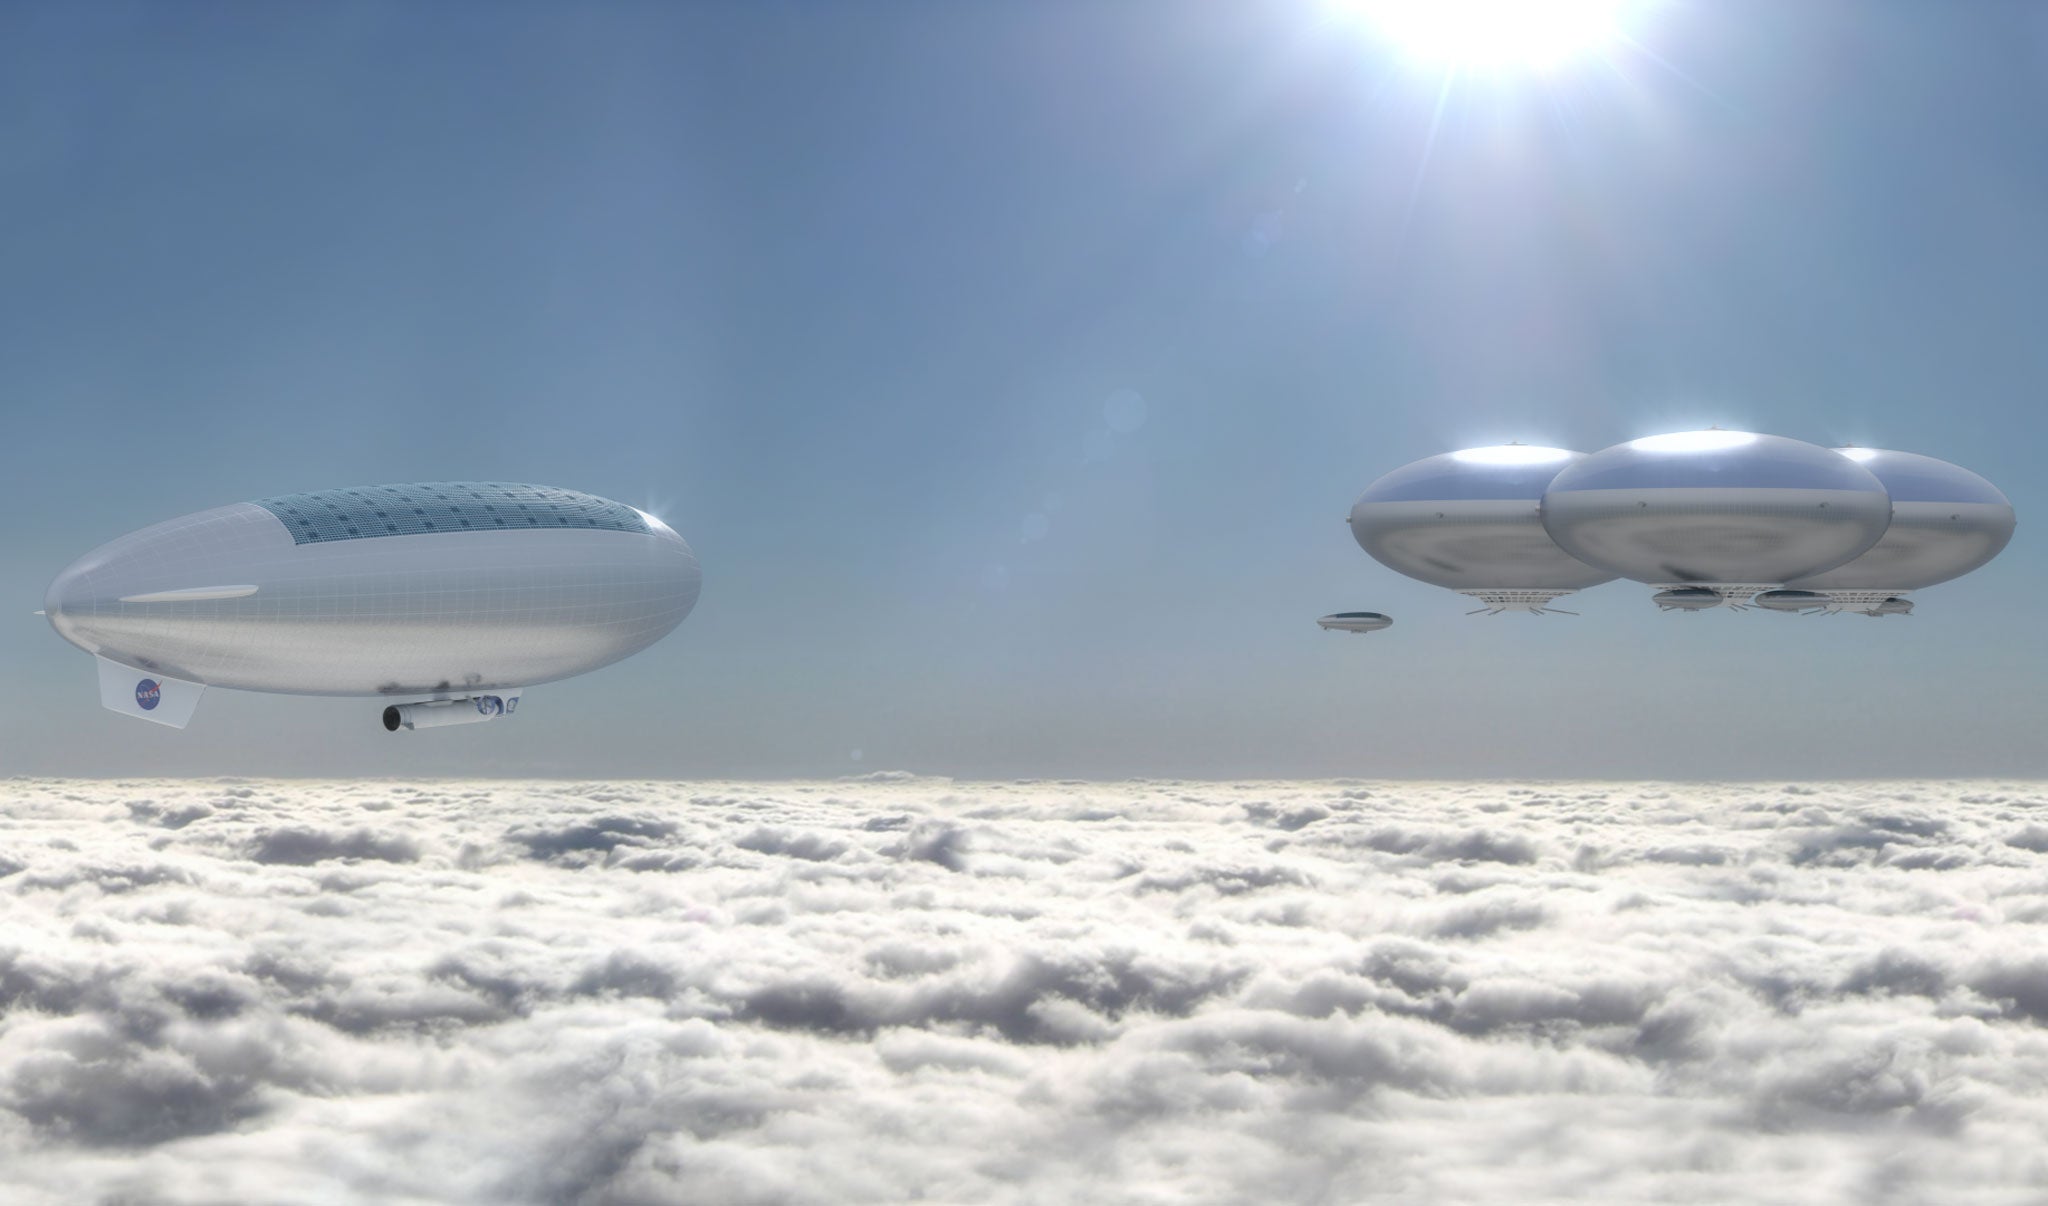 The 'cloud city' as imagined by an artist